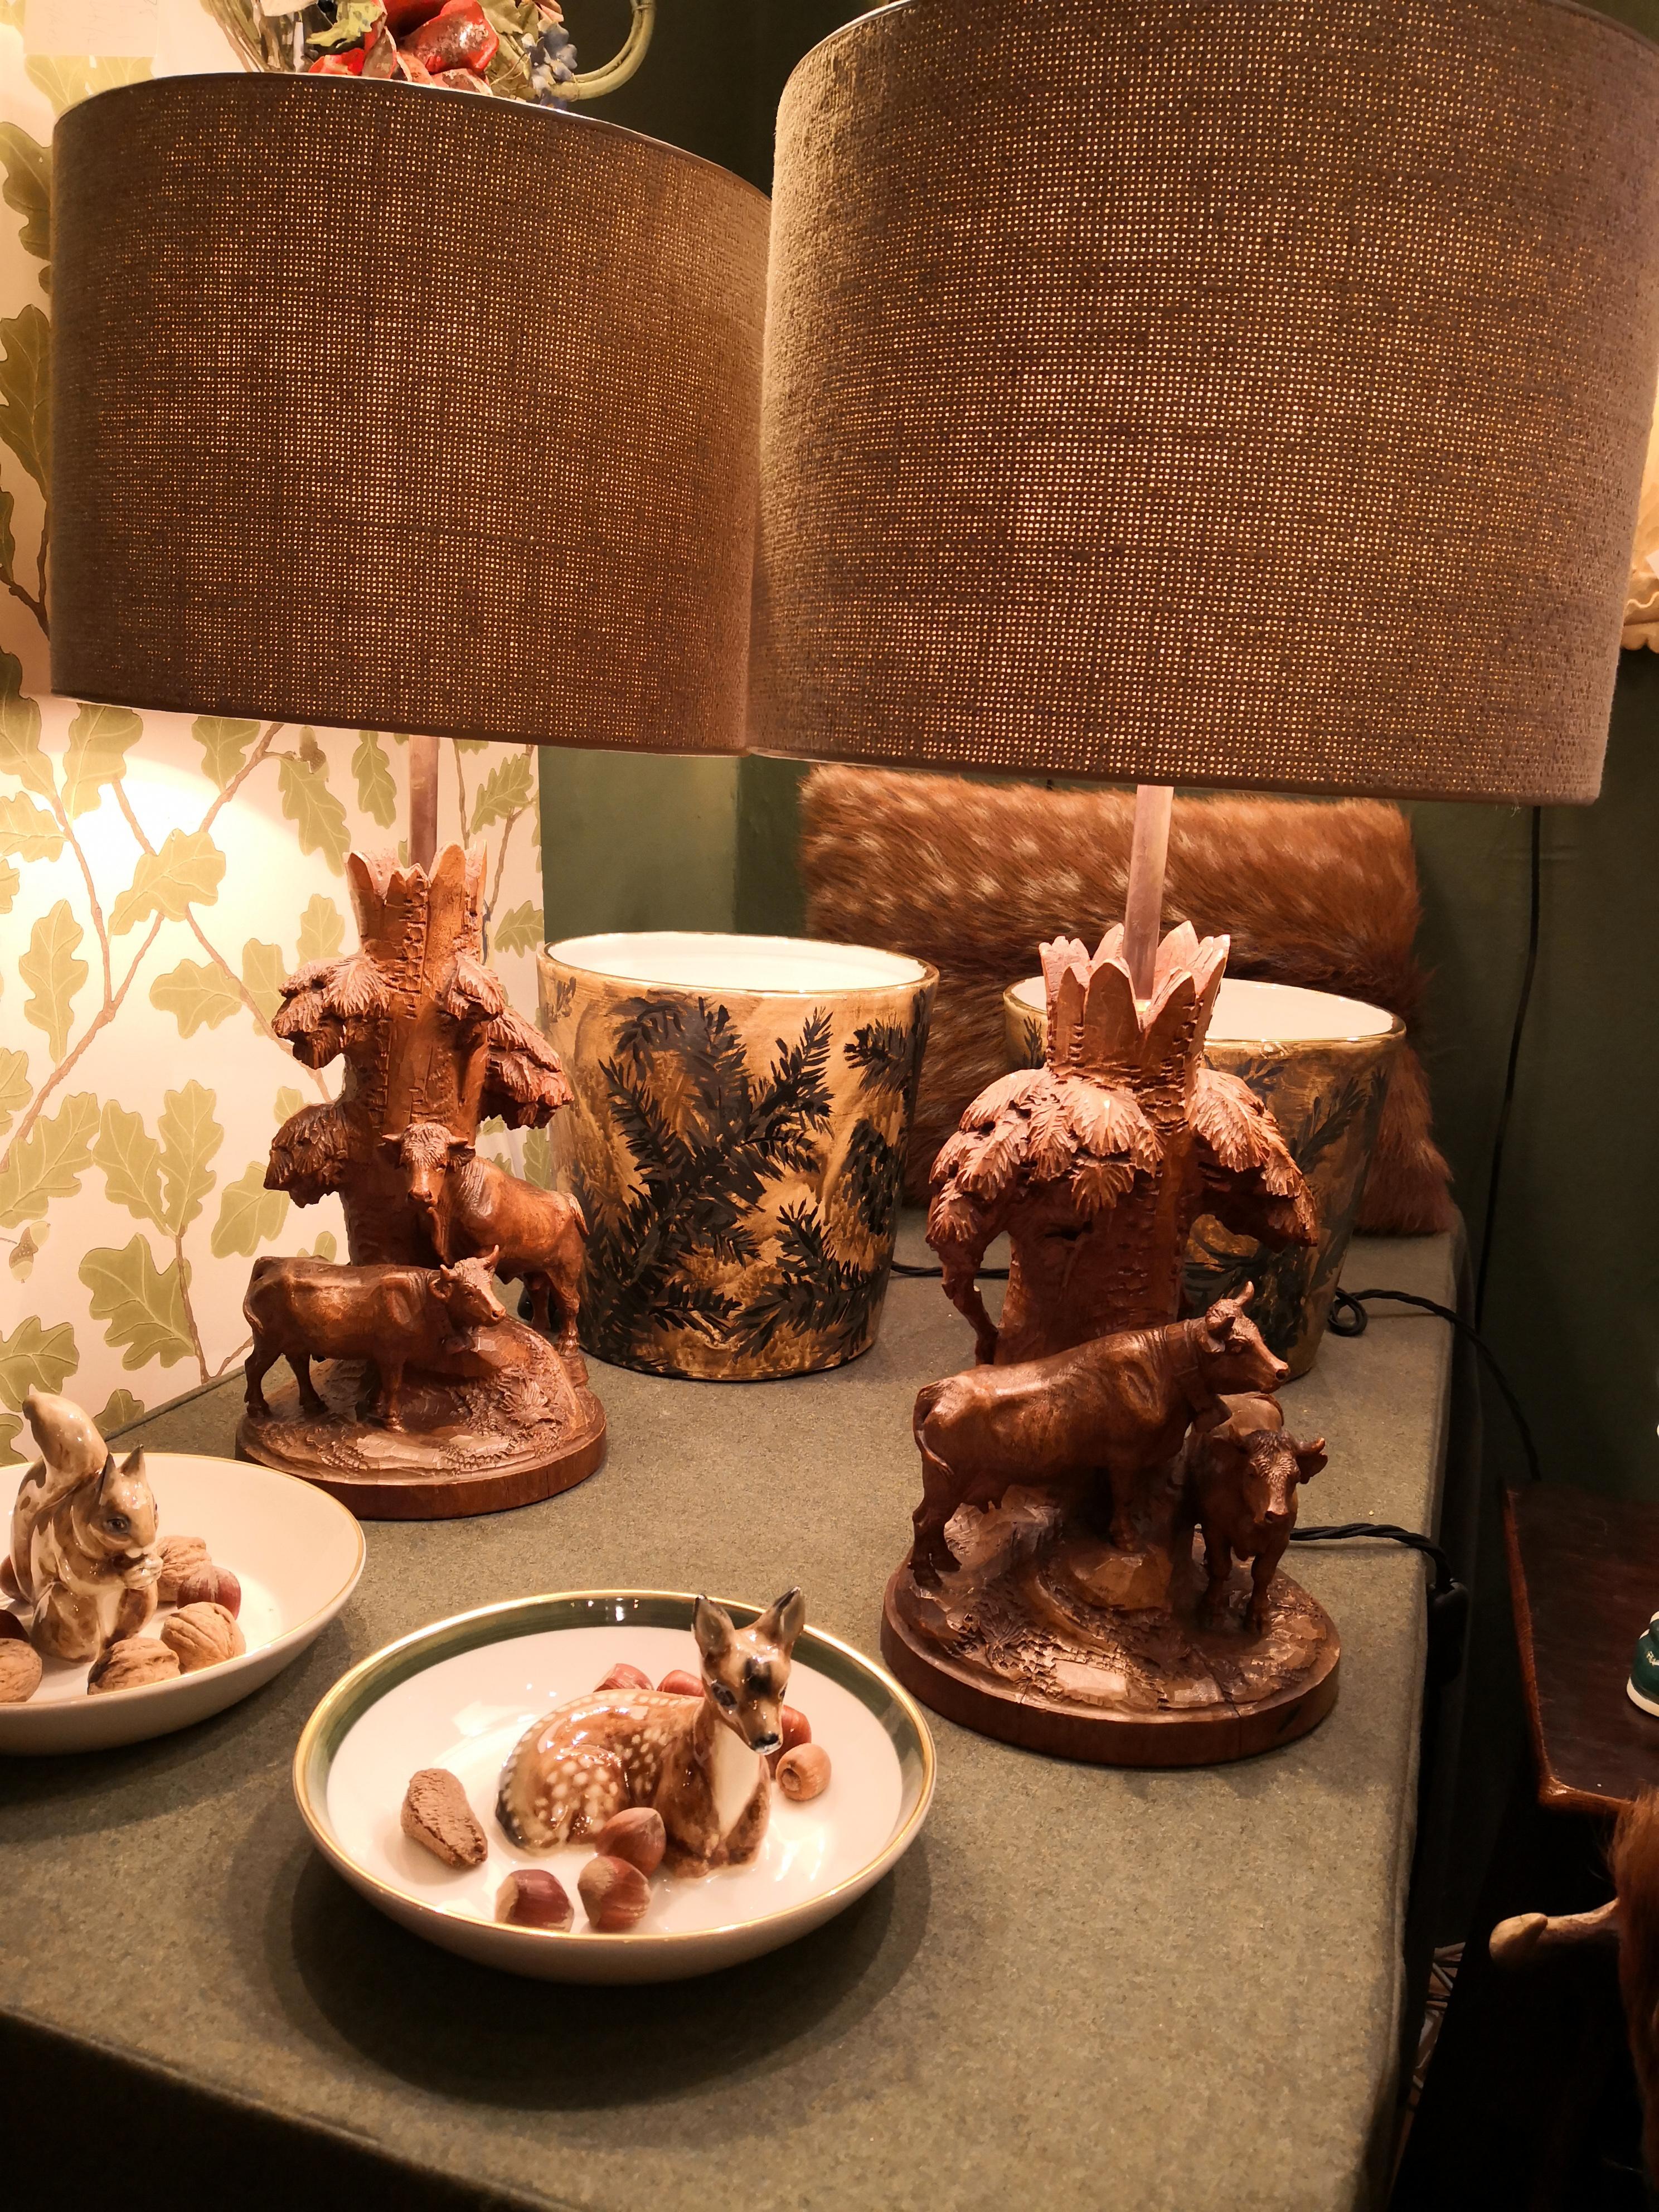 Pair of charming table lamps made of a hand-carved piece of basswood England end of 19th century. The lamp bases are hand carved with cows from one piece of wood in the autentic style of the 19th century. Very detailed hand-carved cows and leaves in